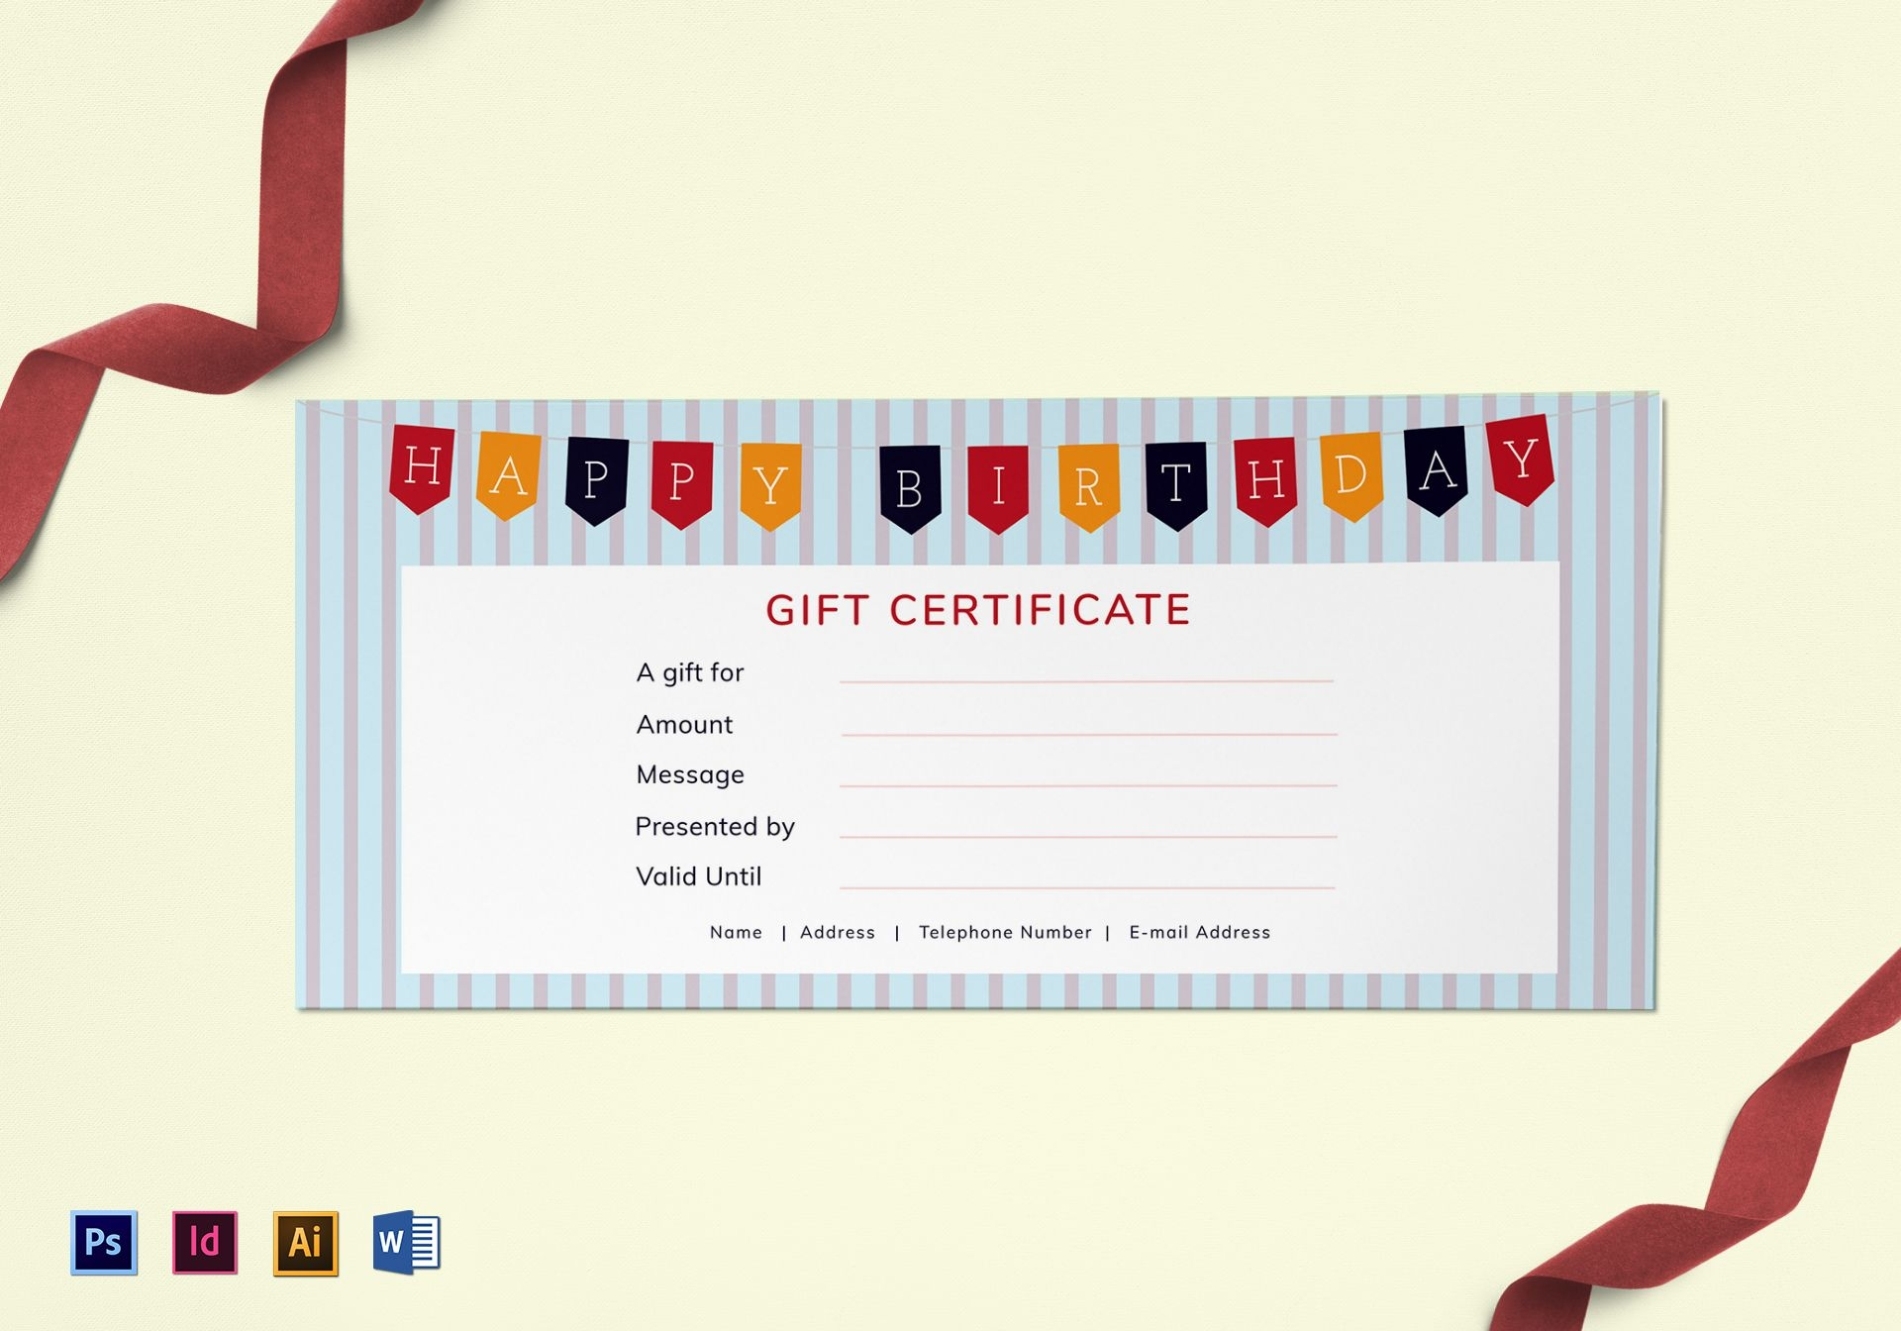 Happy Birthday Gift Certificate Design Template In Psd, Word, Illustrator, Indesign Inside Gift Card Template Illustrator